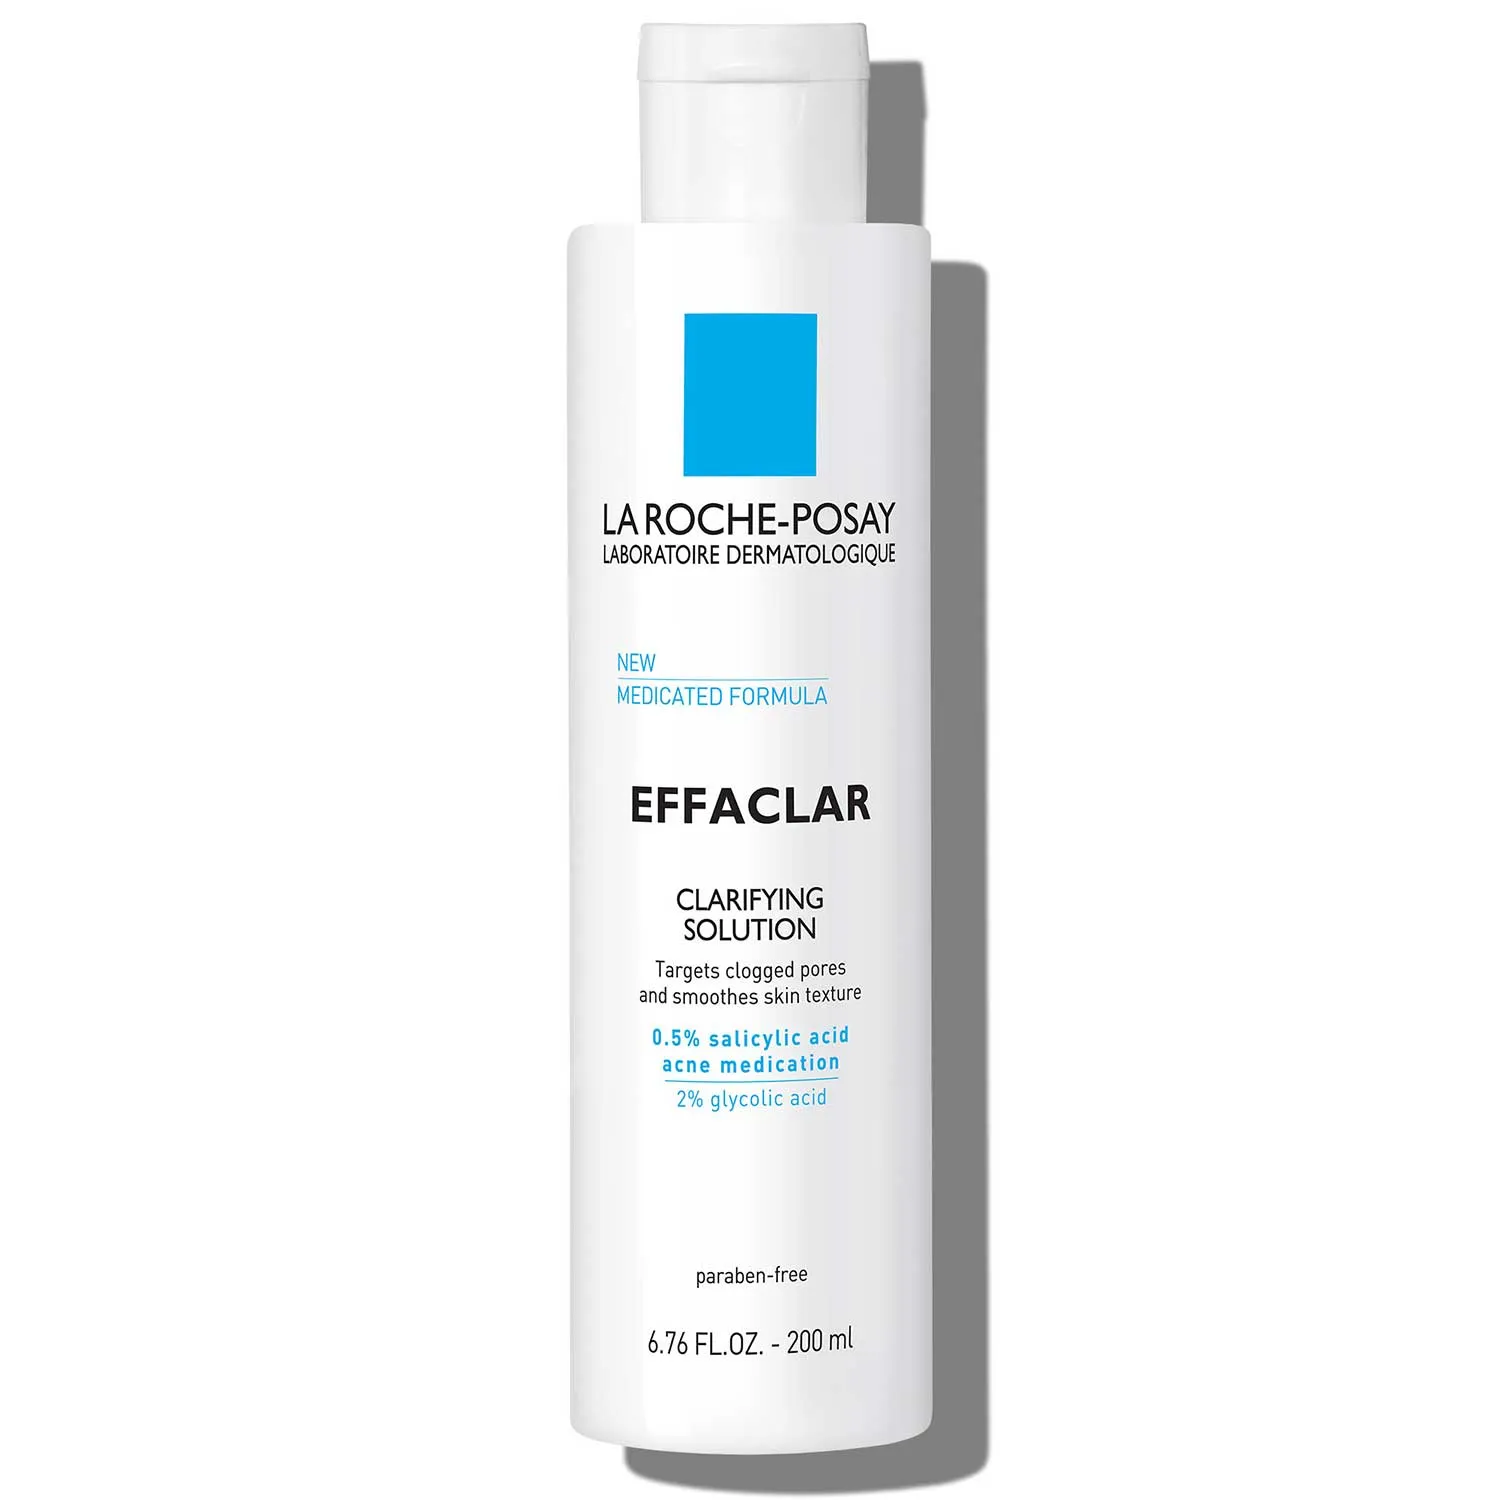 Effaclar Clarifying Solution by La Roche Posay, the best French toner for acne-prone skin.